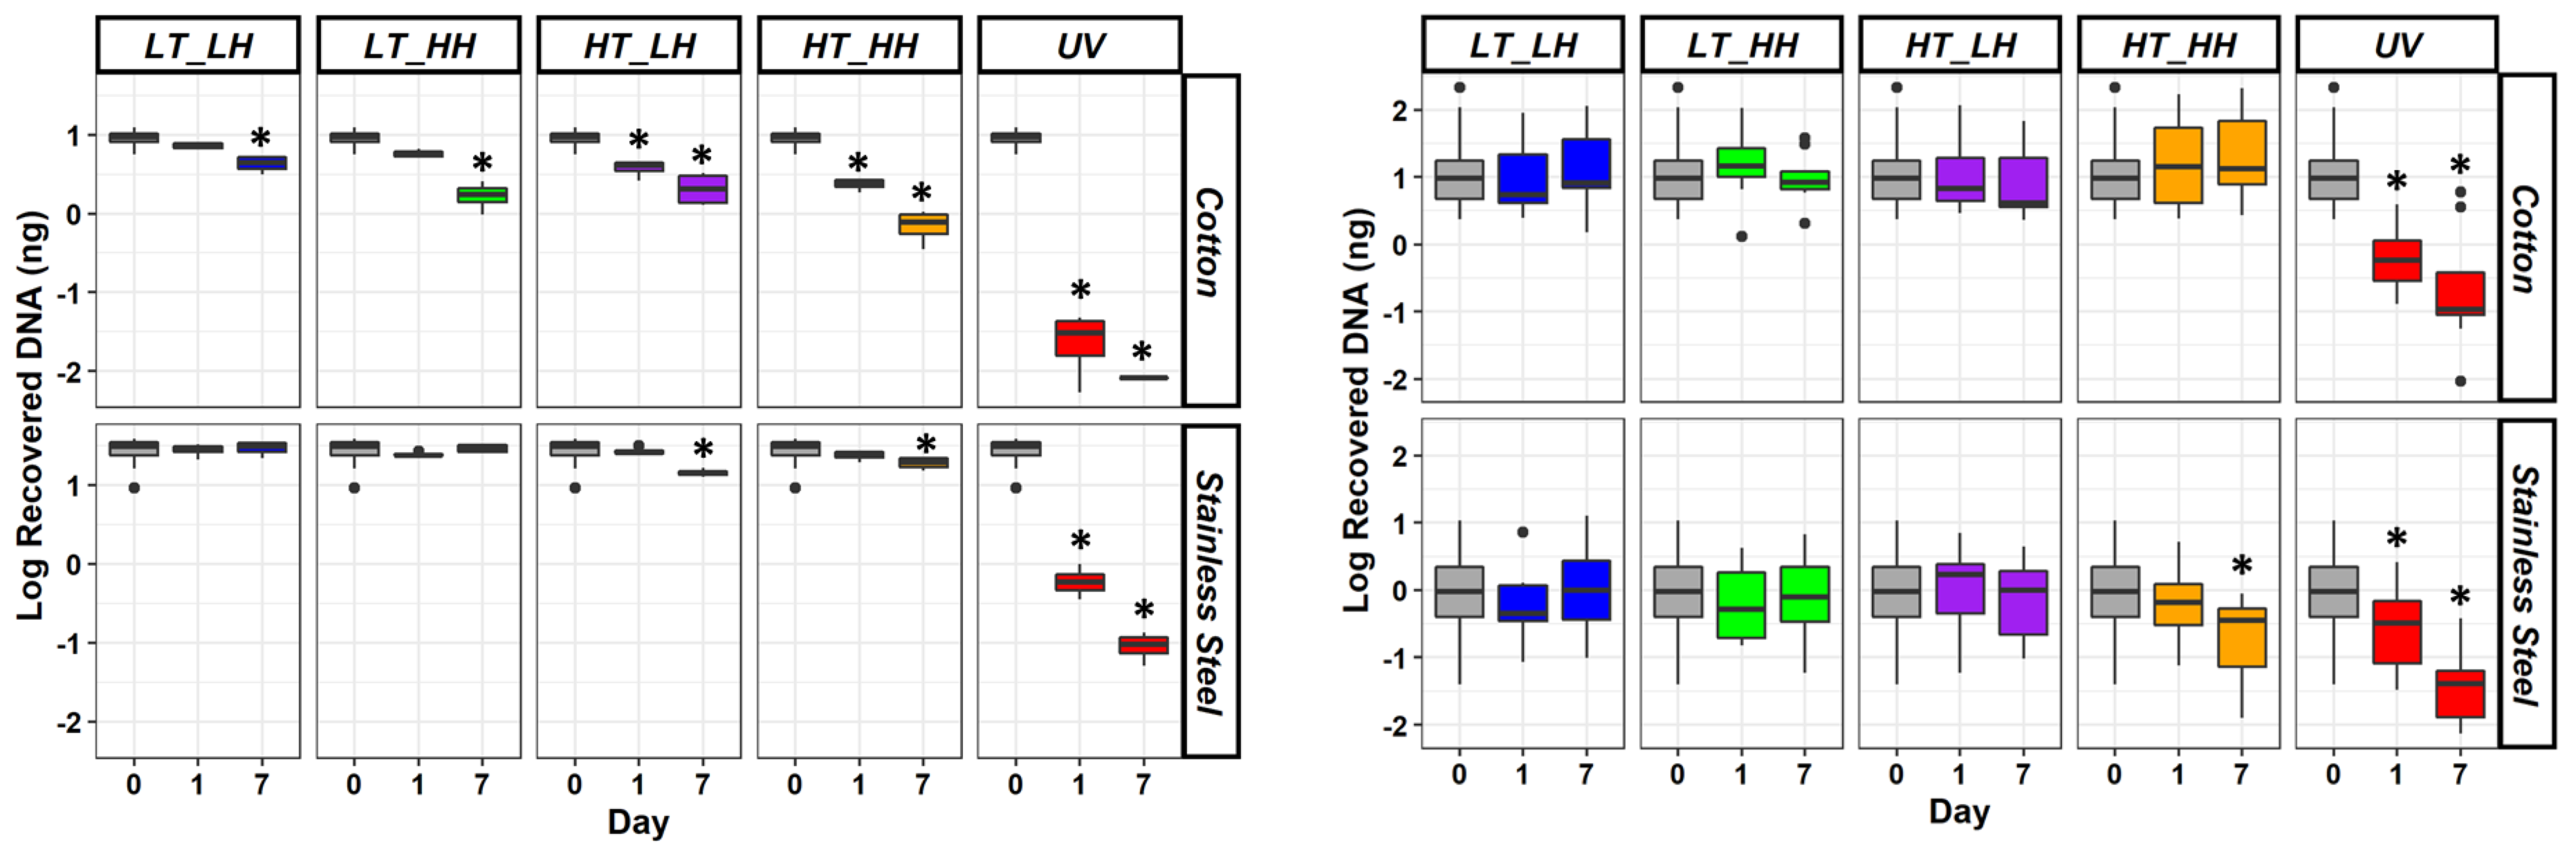 Figure 2: Results of the control DNA (left) and touch DNA (right) persistence across varying environmental conditions on cotton and stainless steel over seven days